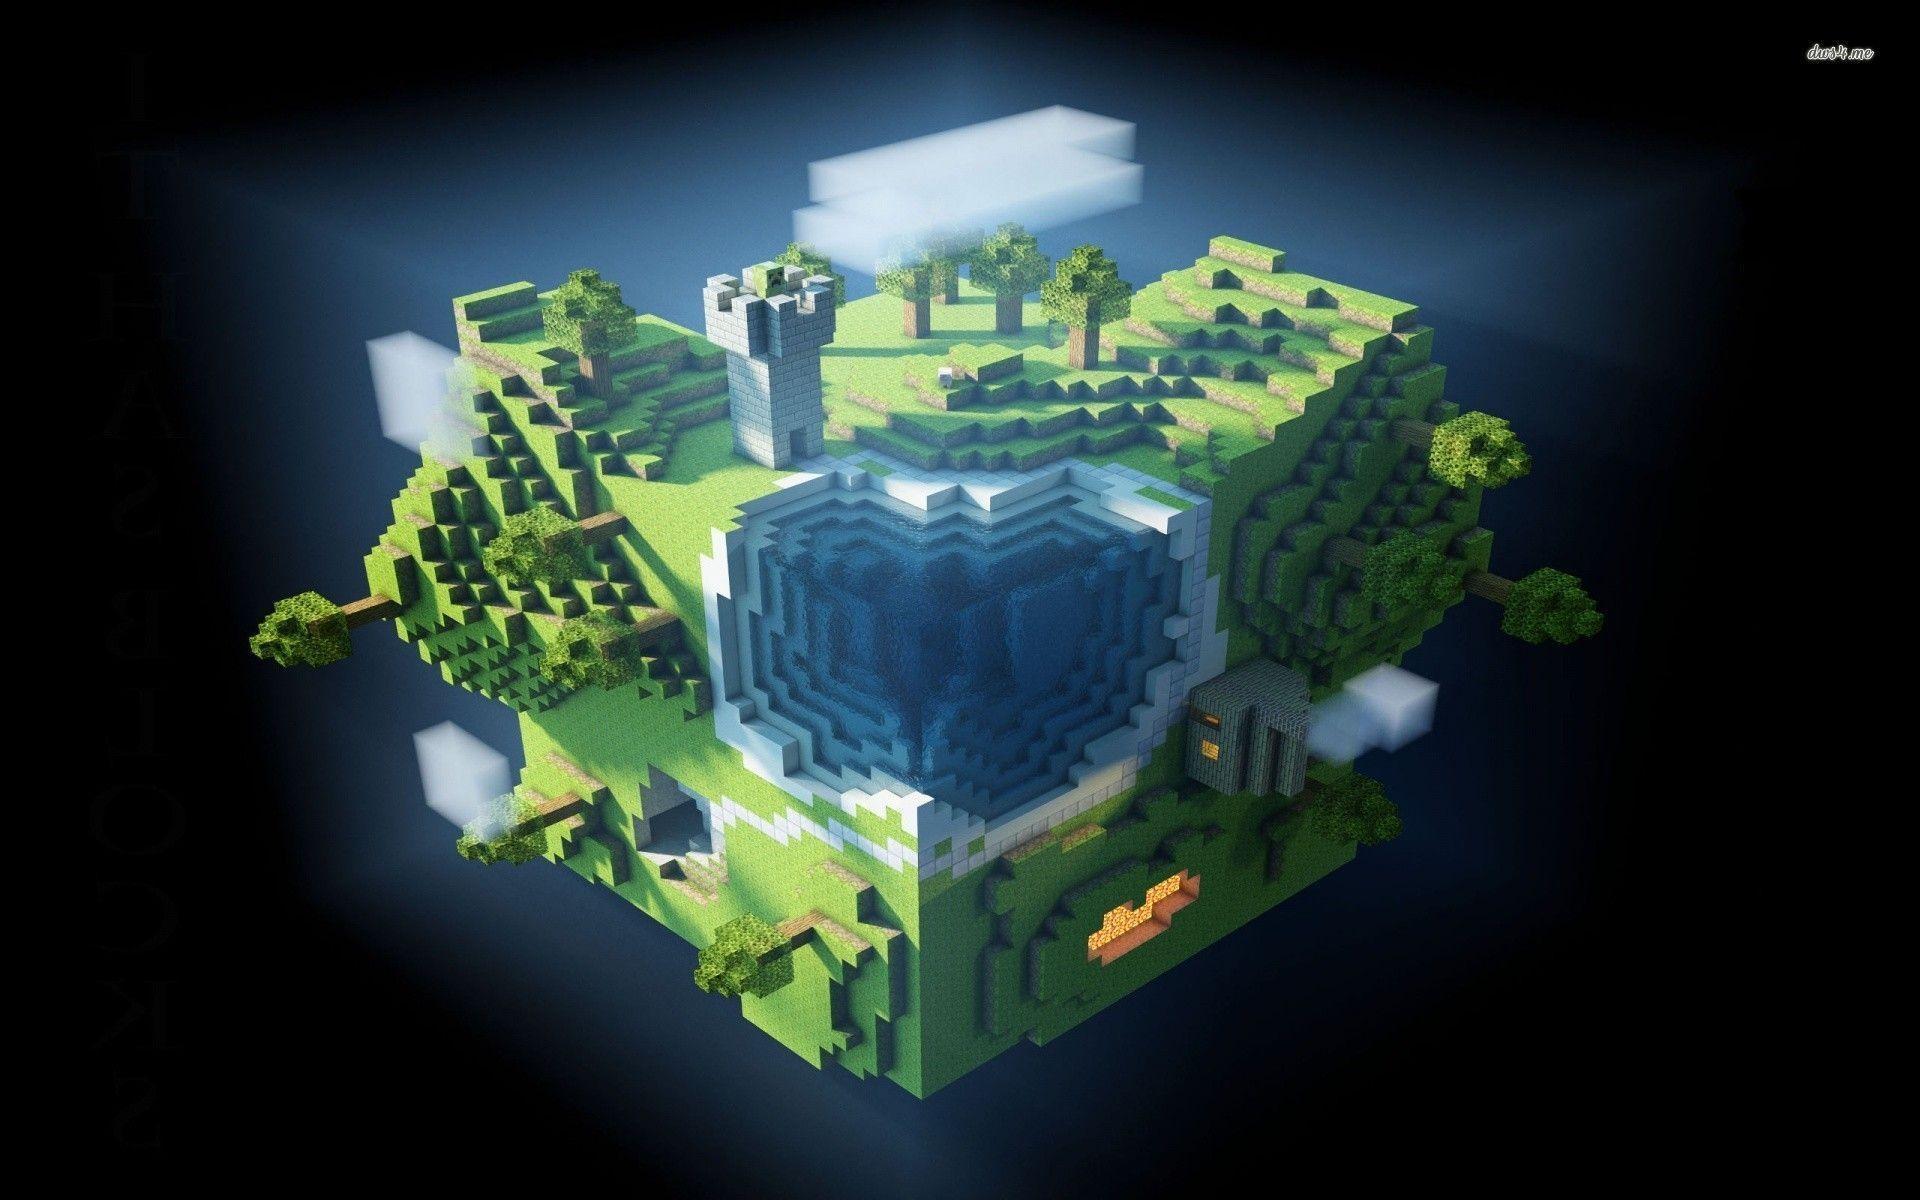 Awesome Minecraft Wallpaper